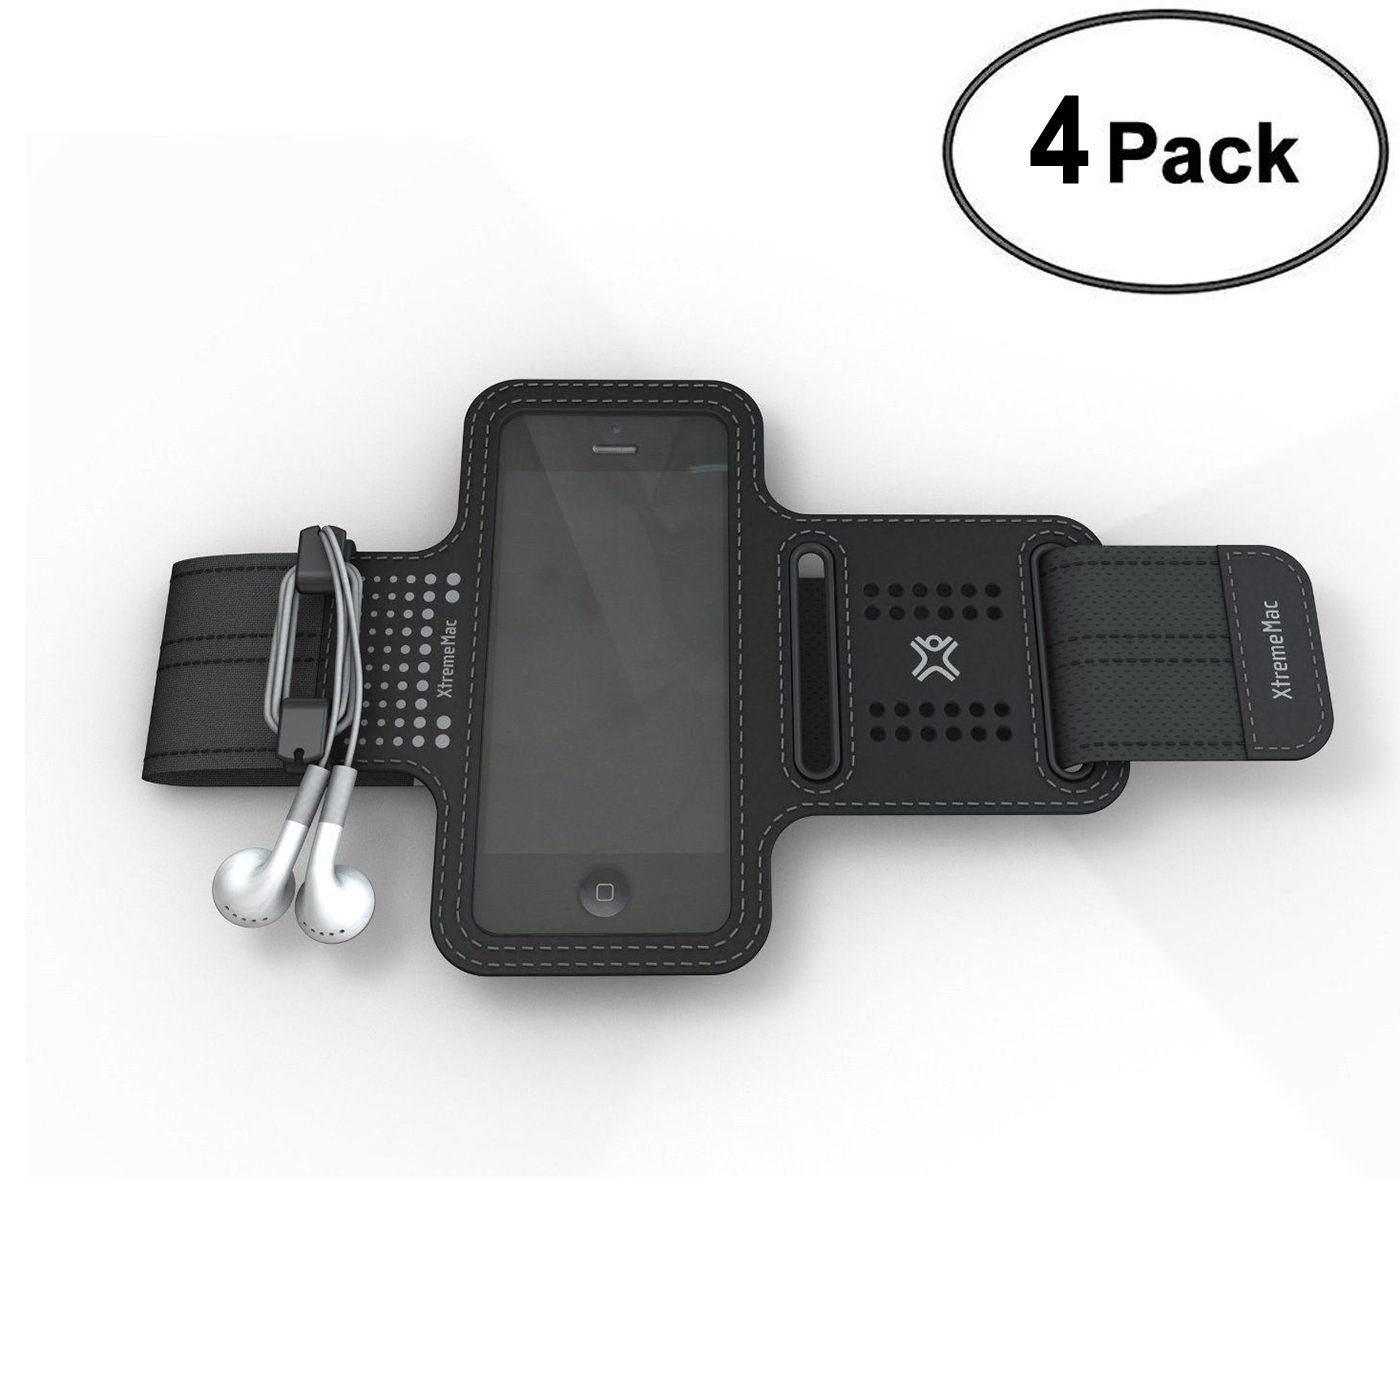 Plateau ik draag kleding behandeling Sport Armband Case for iPod Touch 5G, iPhone 5/5S/5C